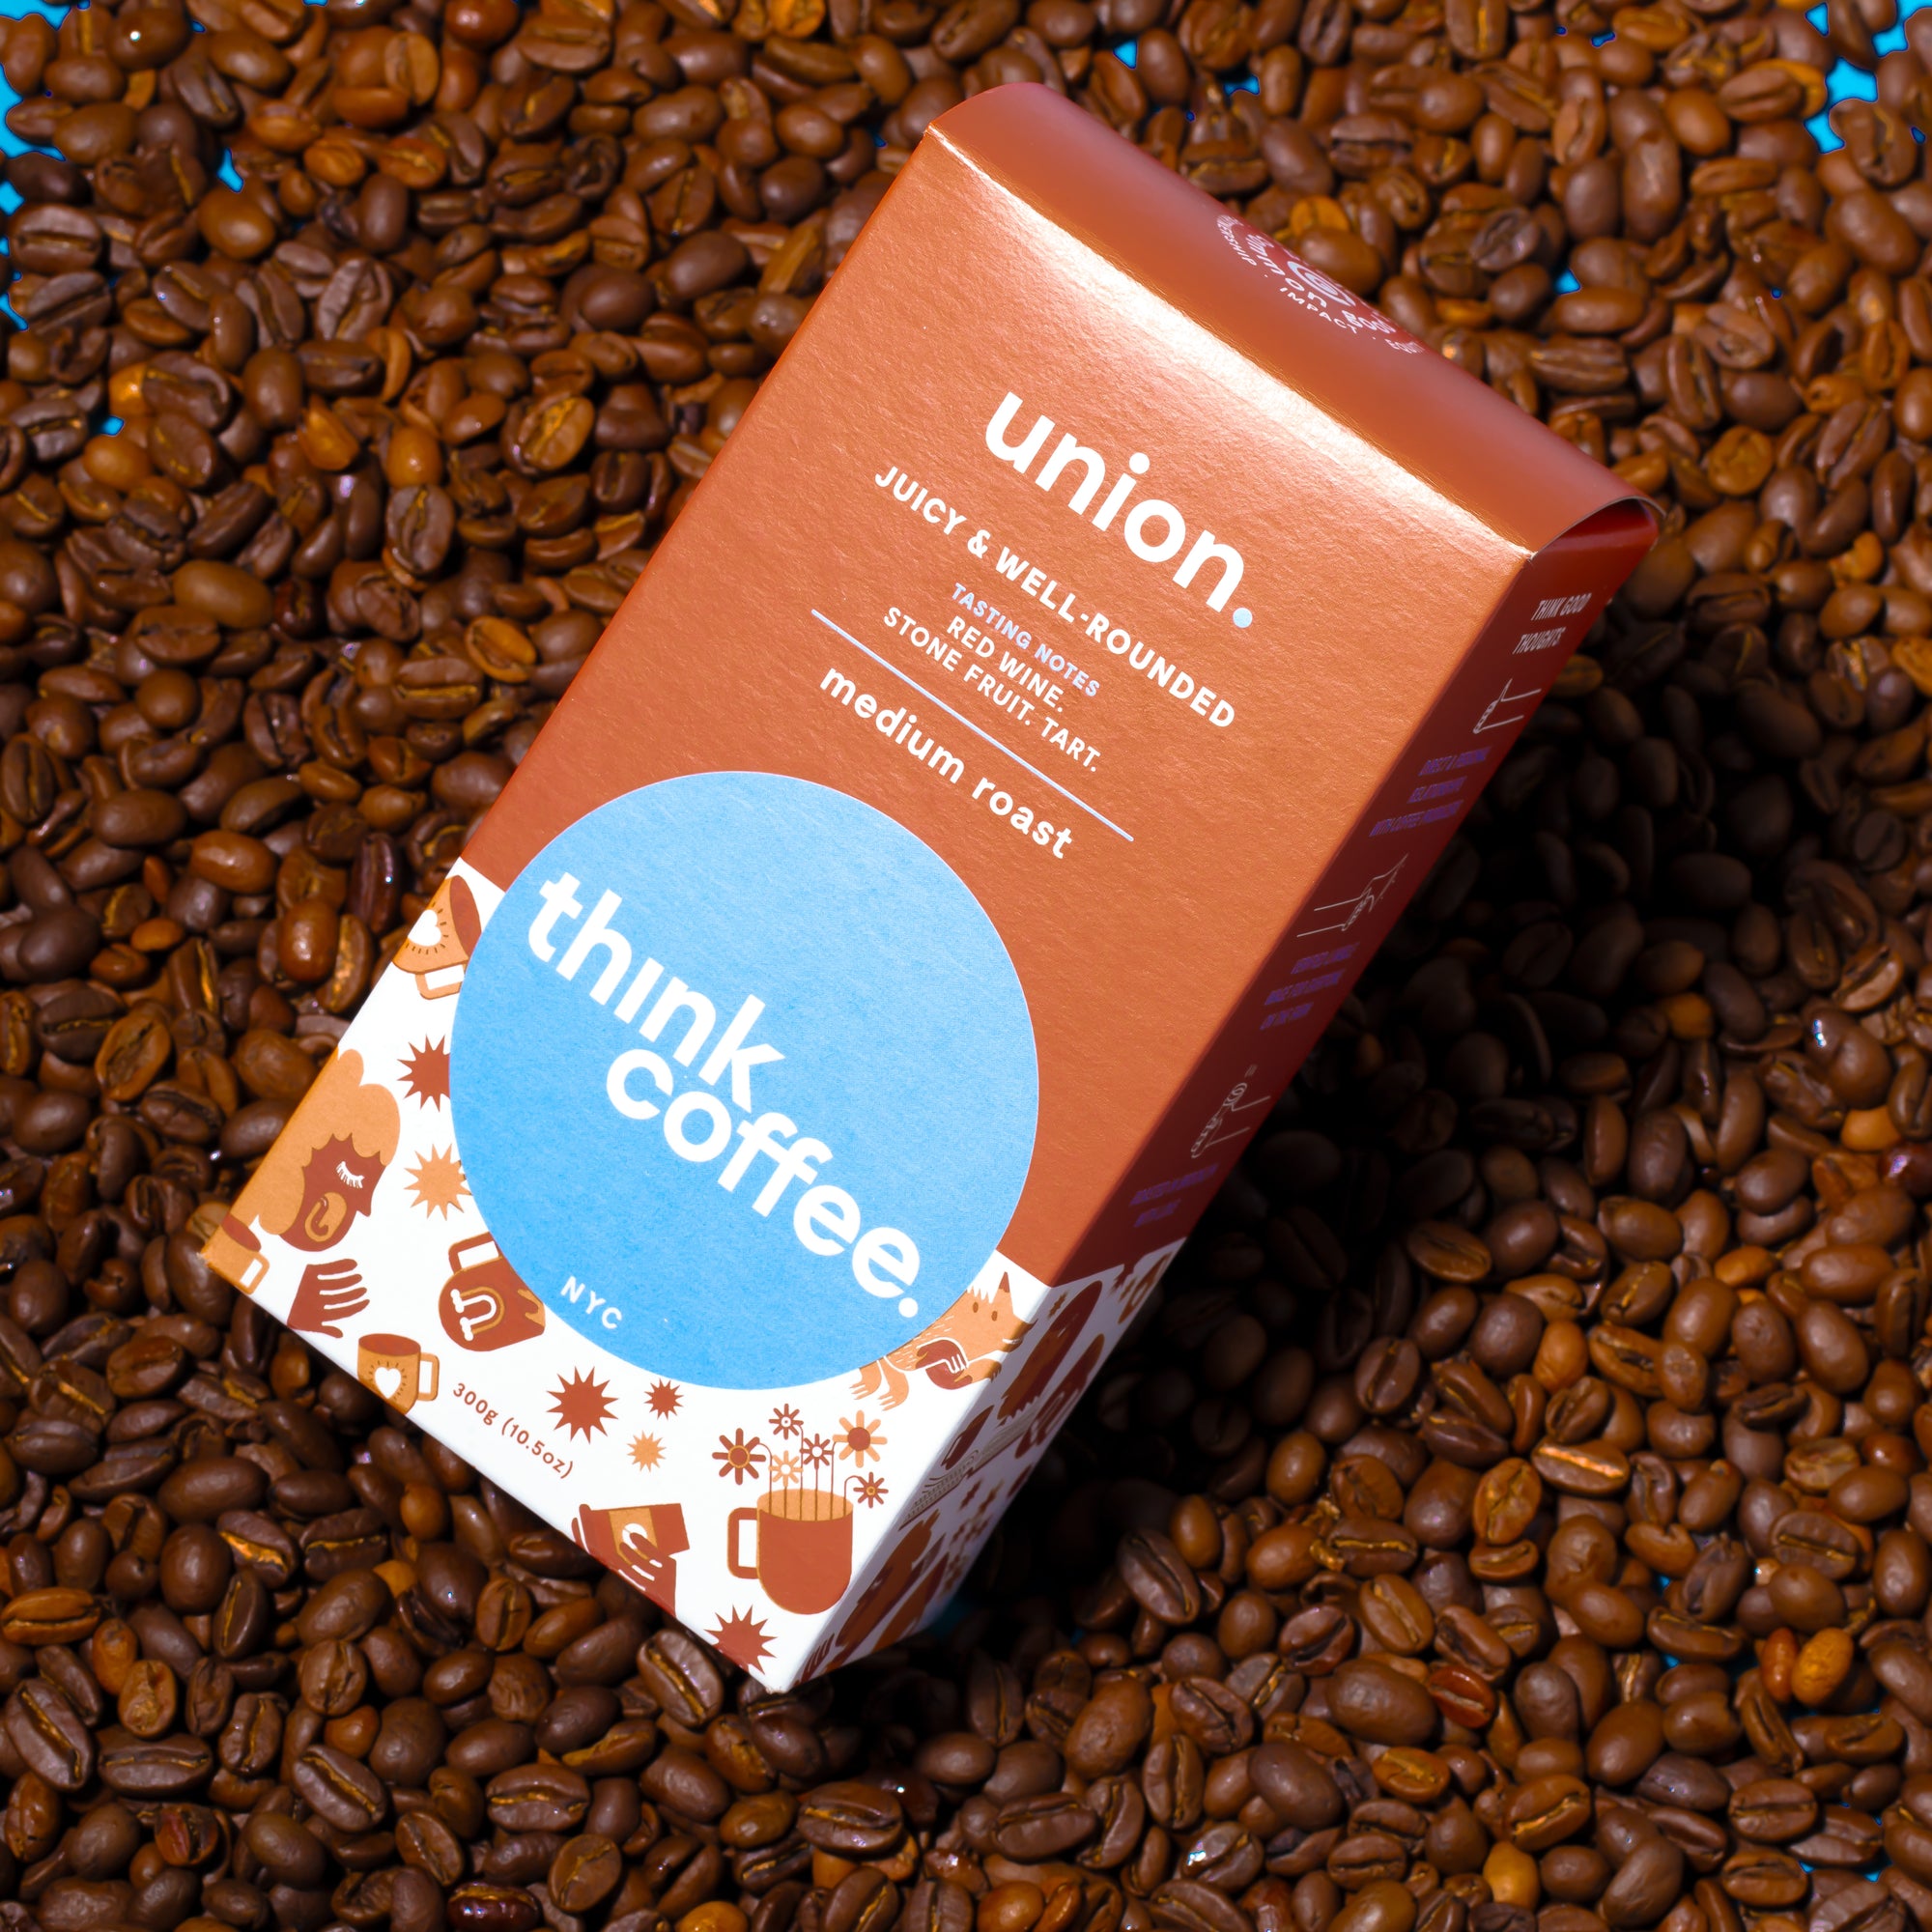 Union Blend Monthly Subscription